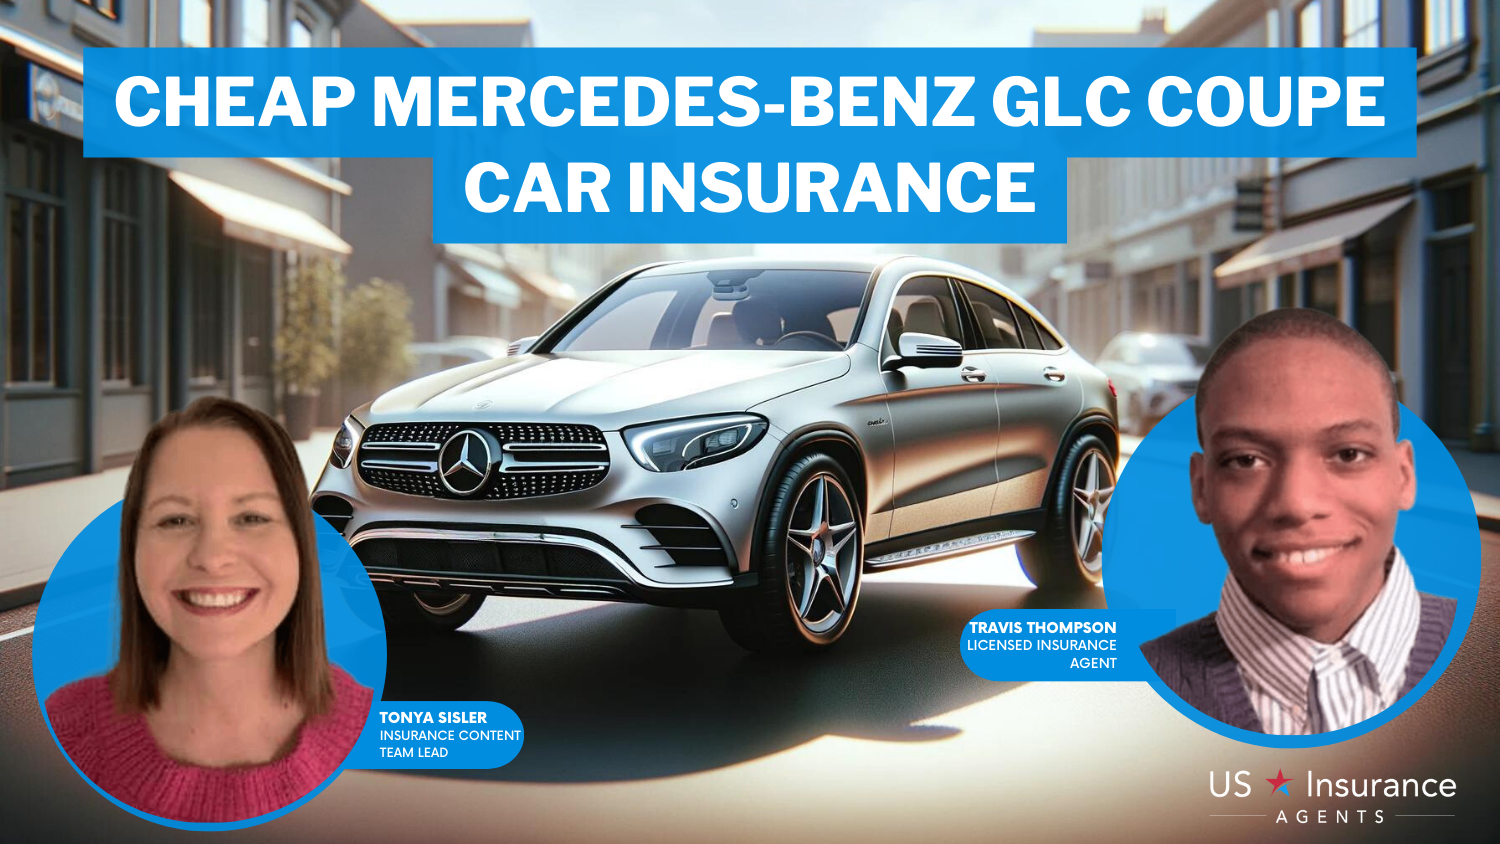 Cheap Mercedes-Benz GLC Coupe Car Insurance: American Family, Travelers, and Farmers